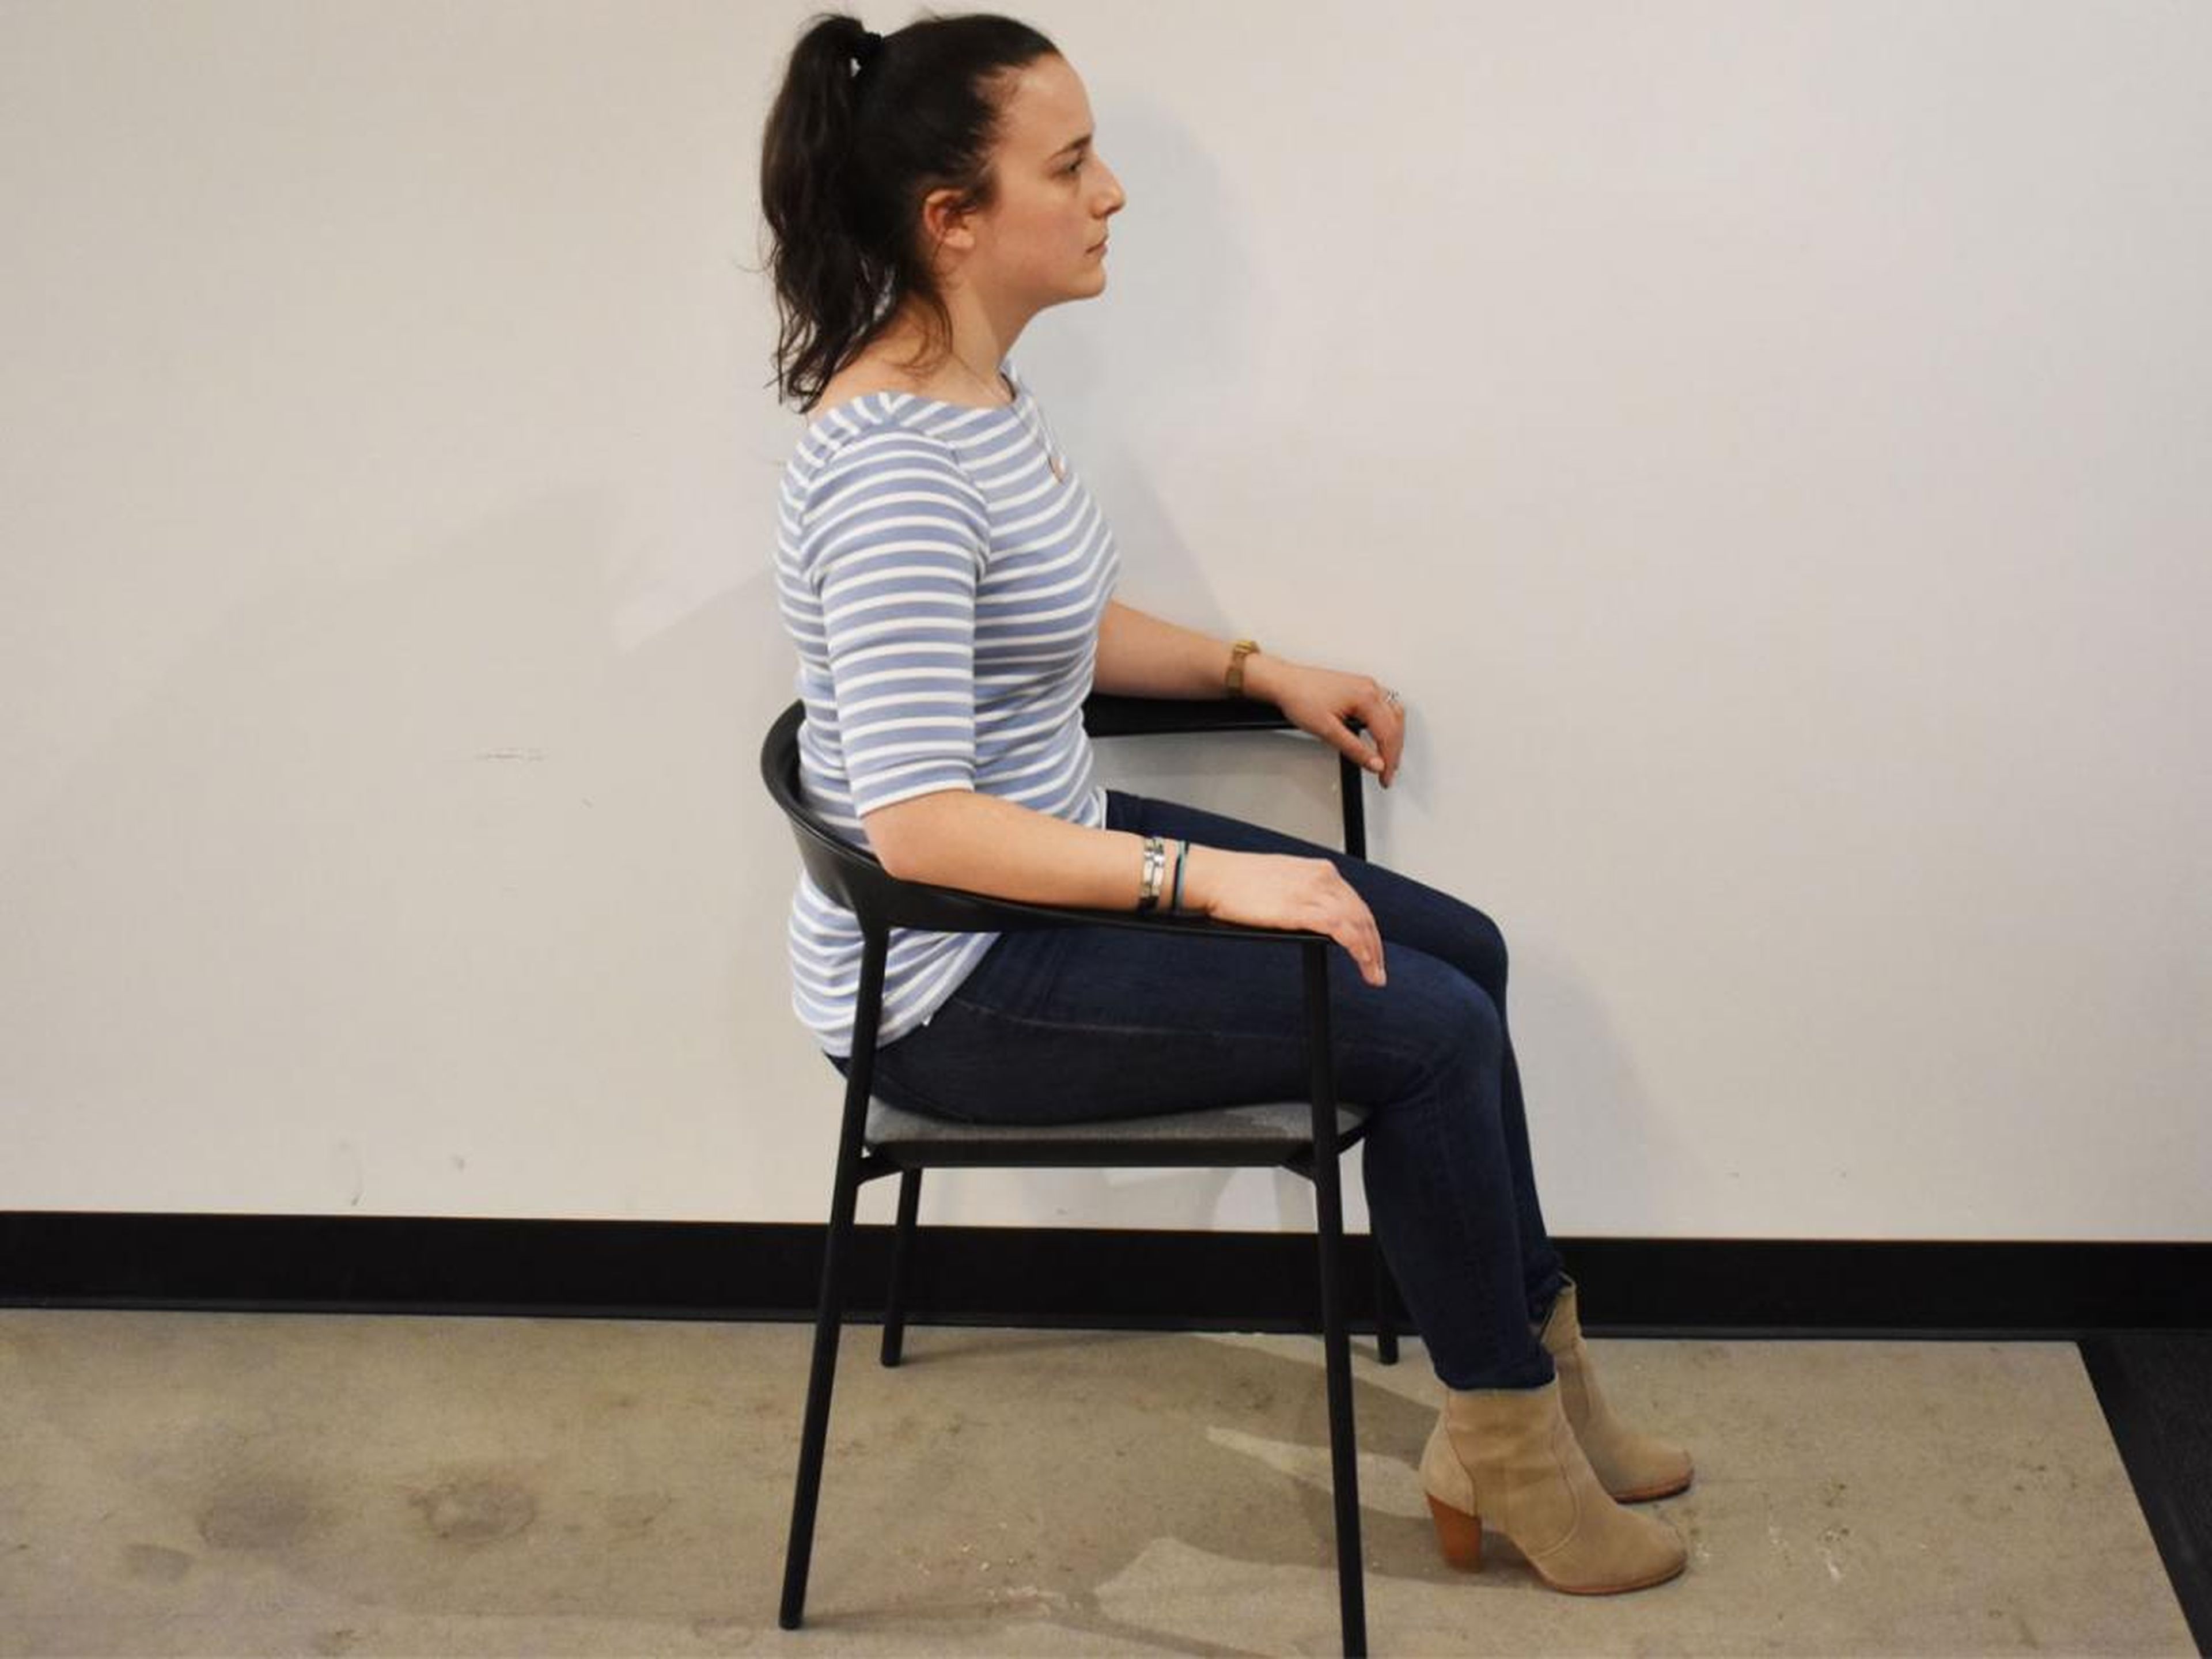 Proper posture while seated